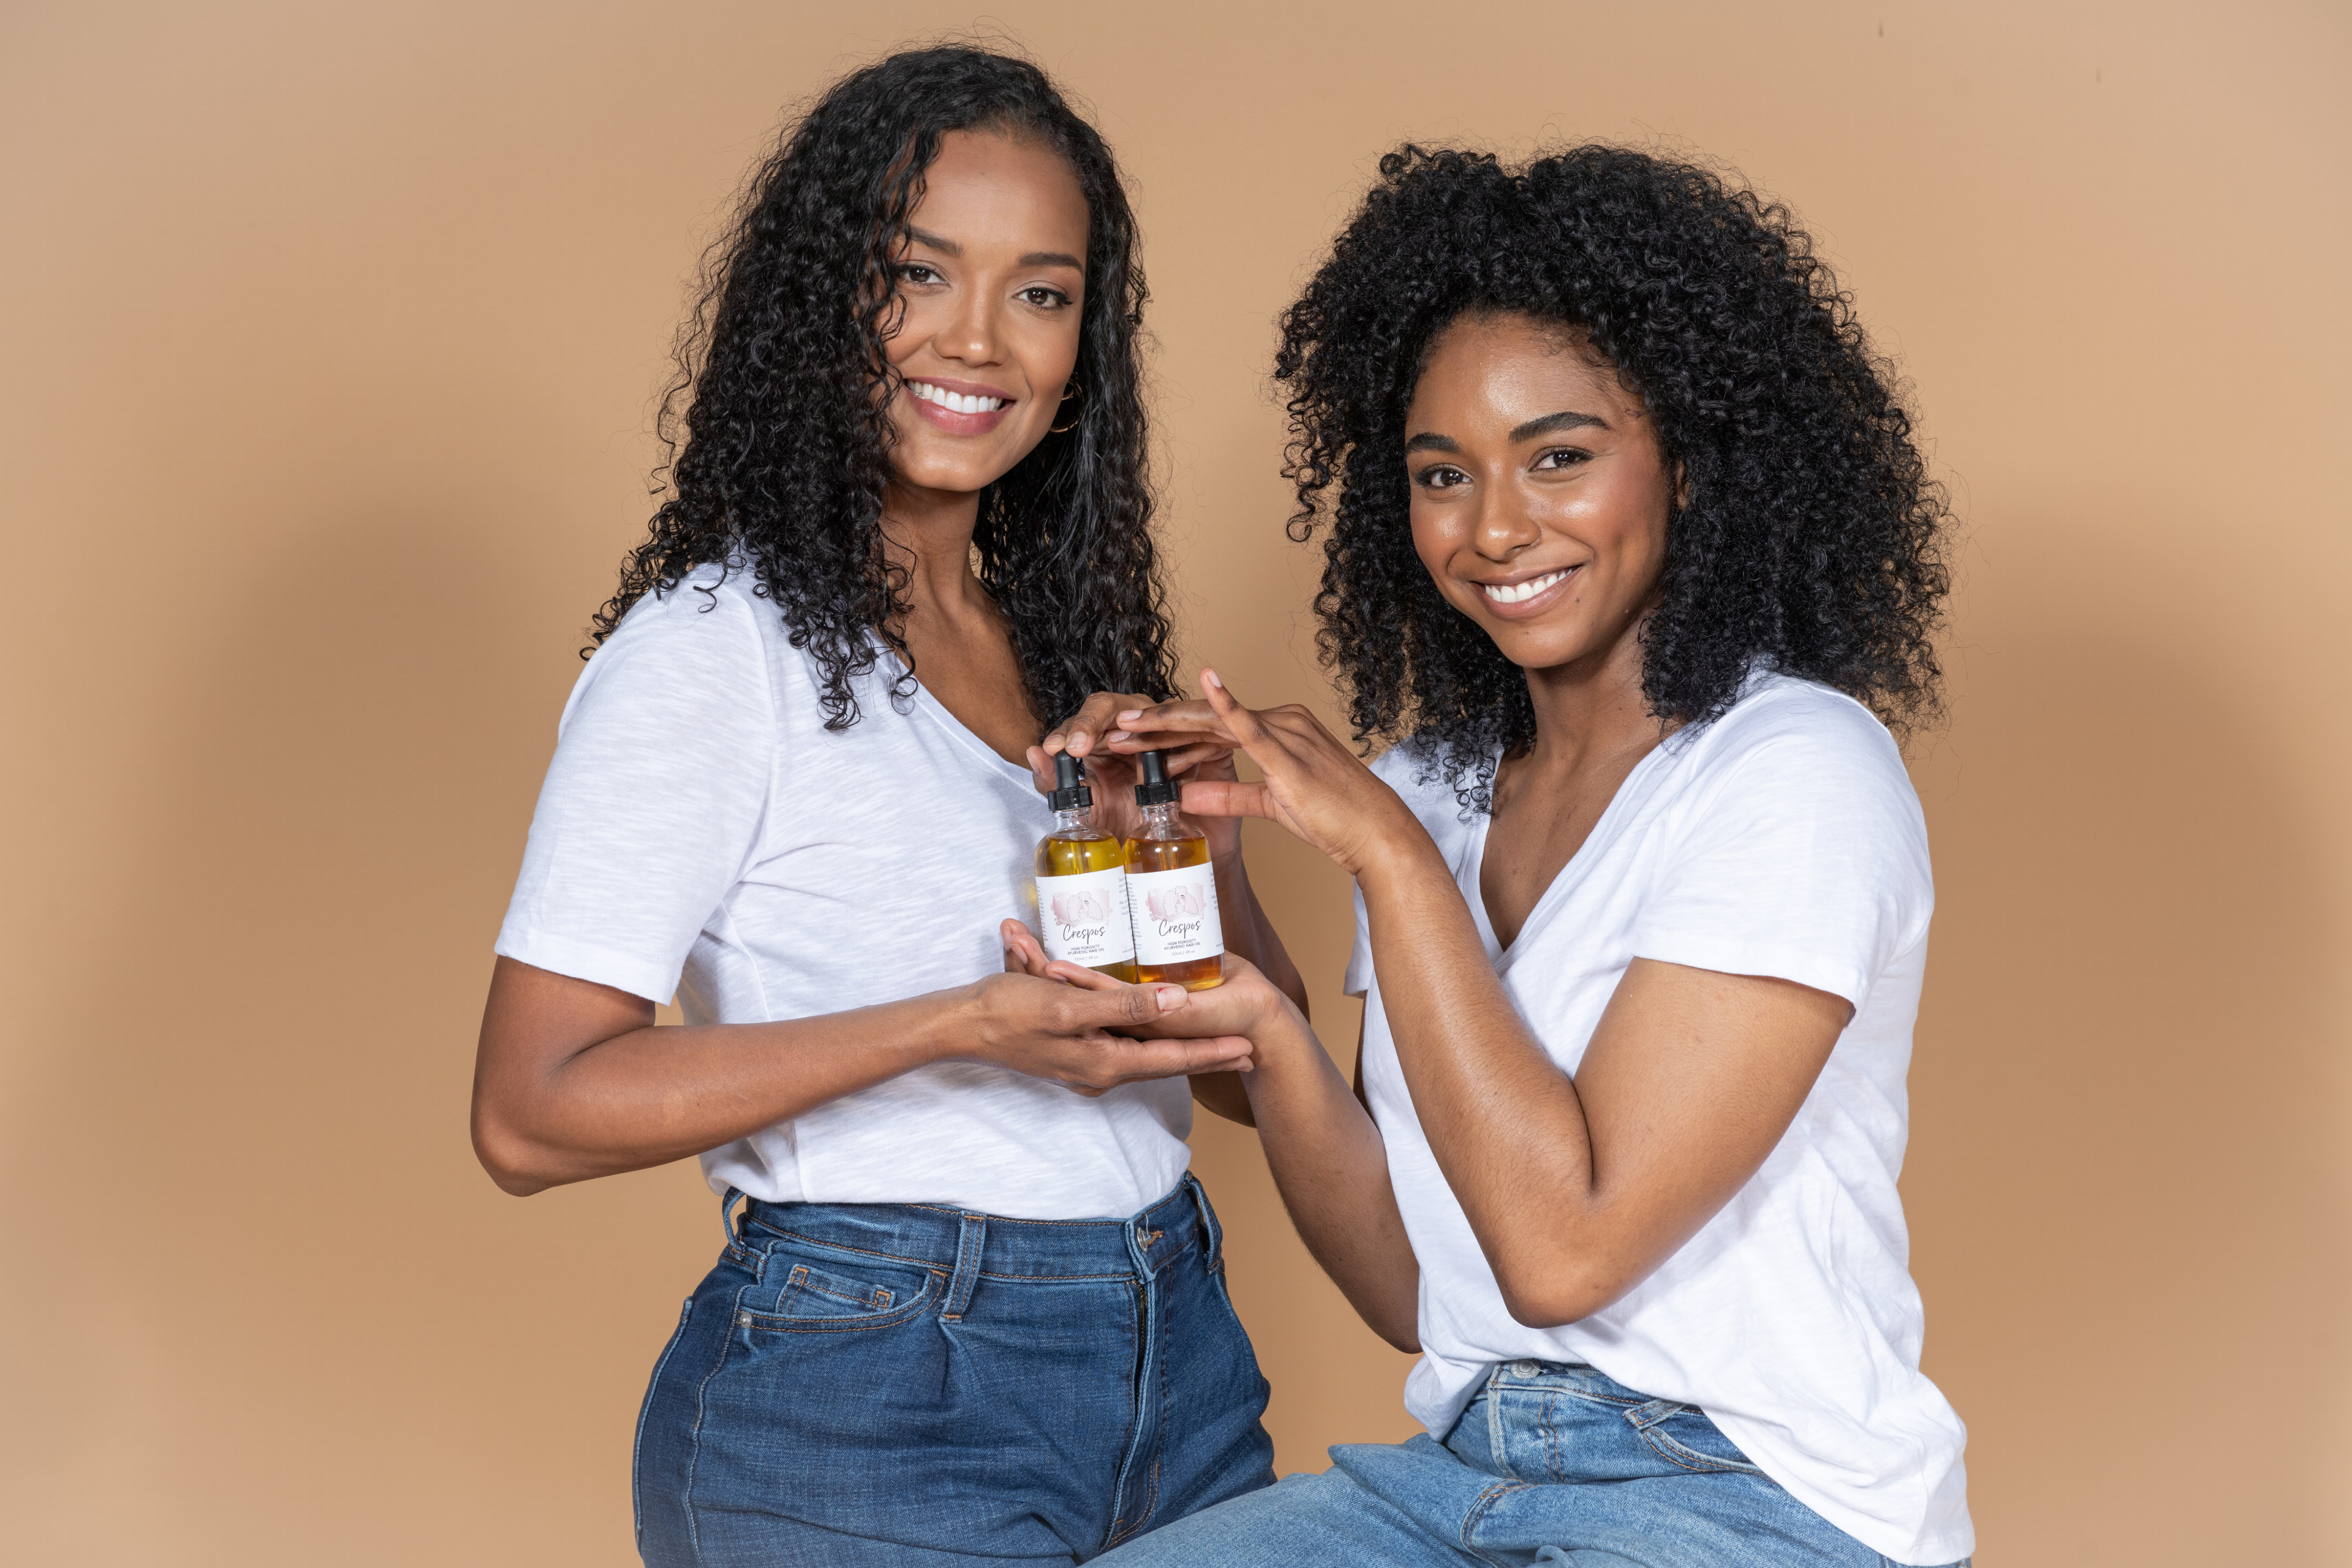 Crespos Hair Products Launches New Line of Ayurvedic Hair Care Products for All Curl Types